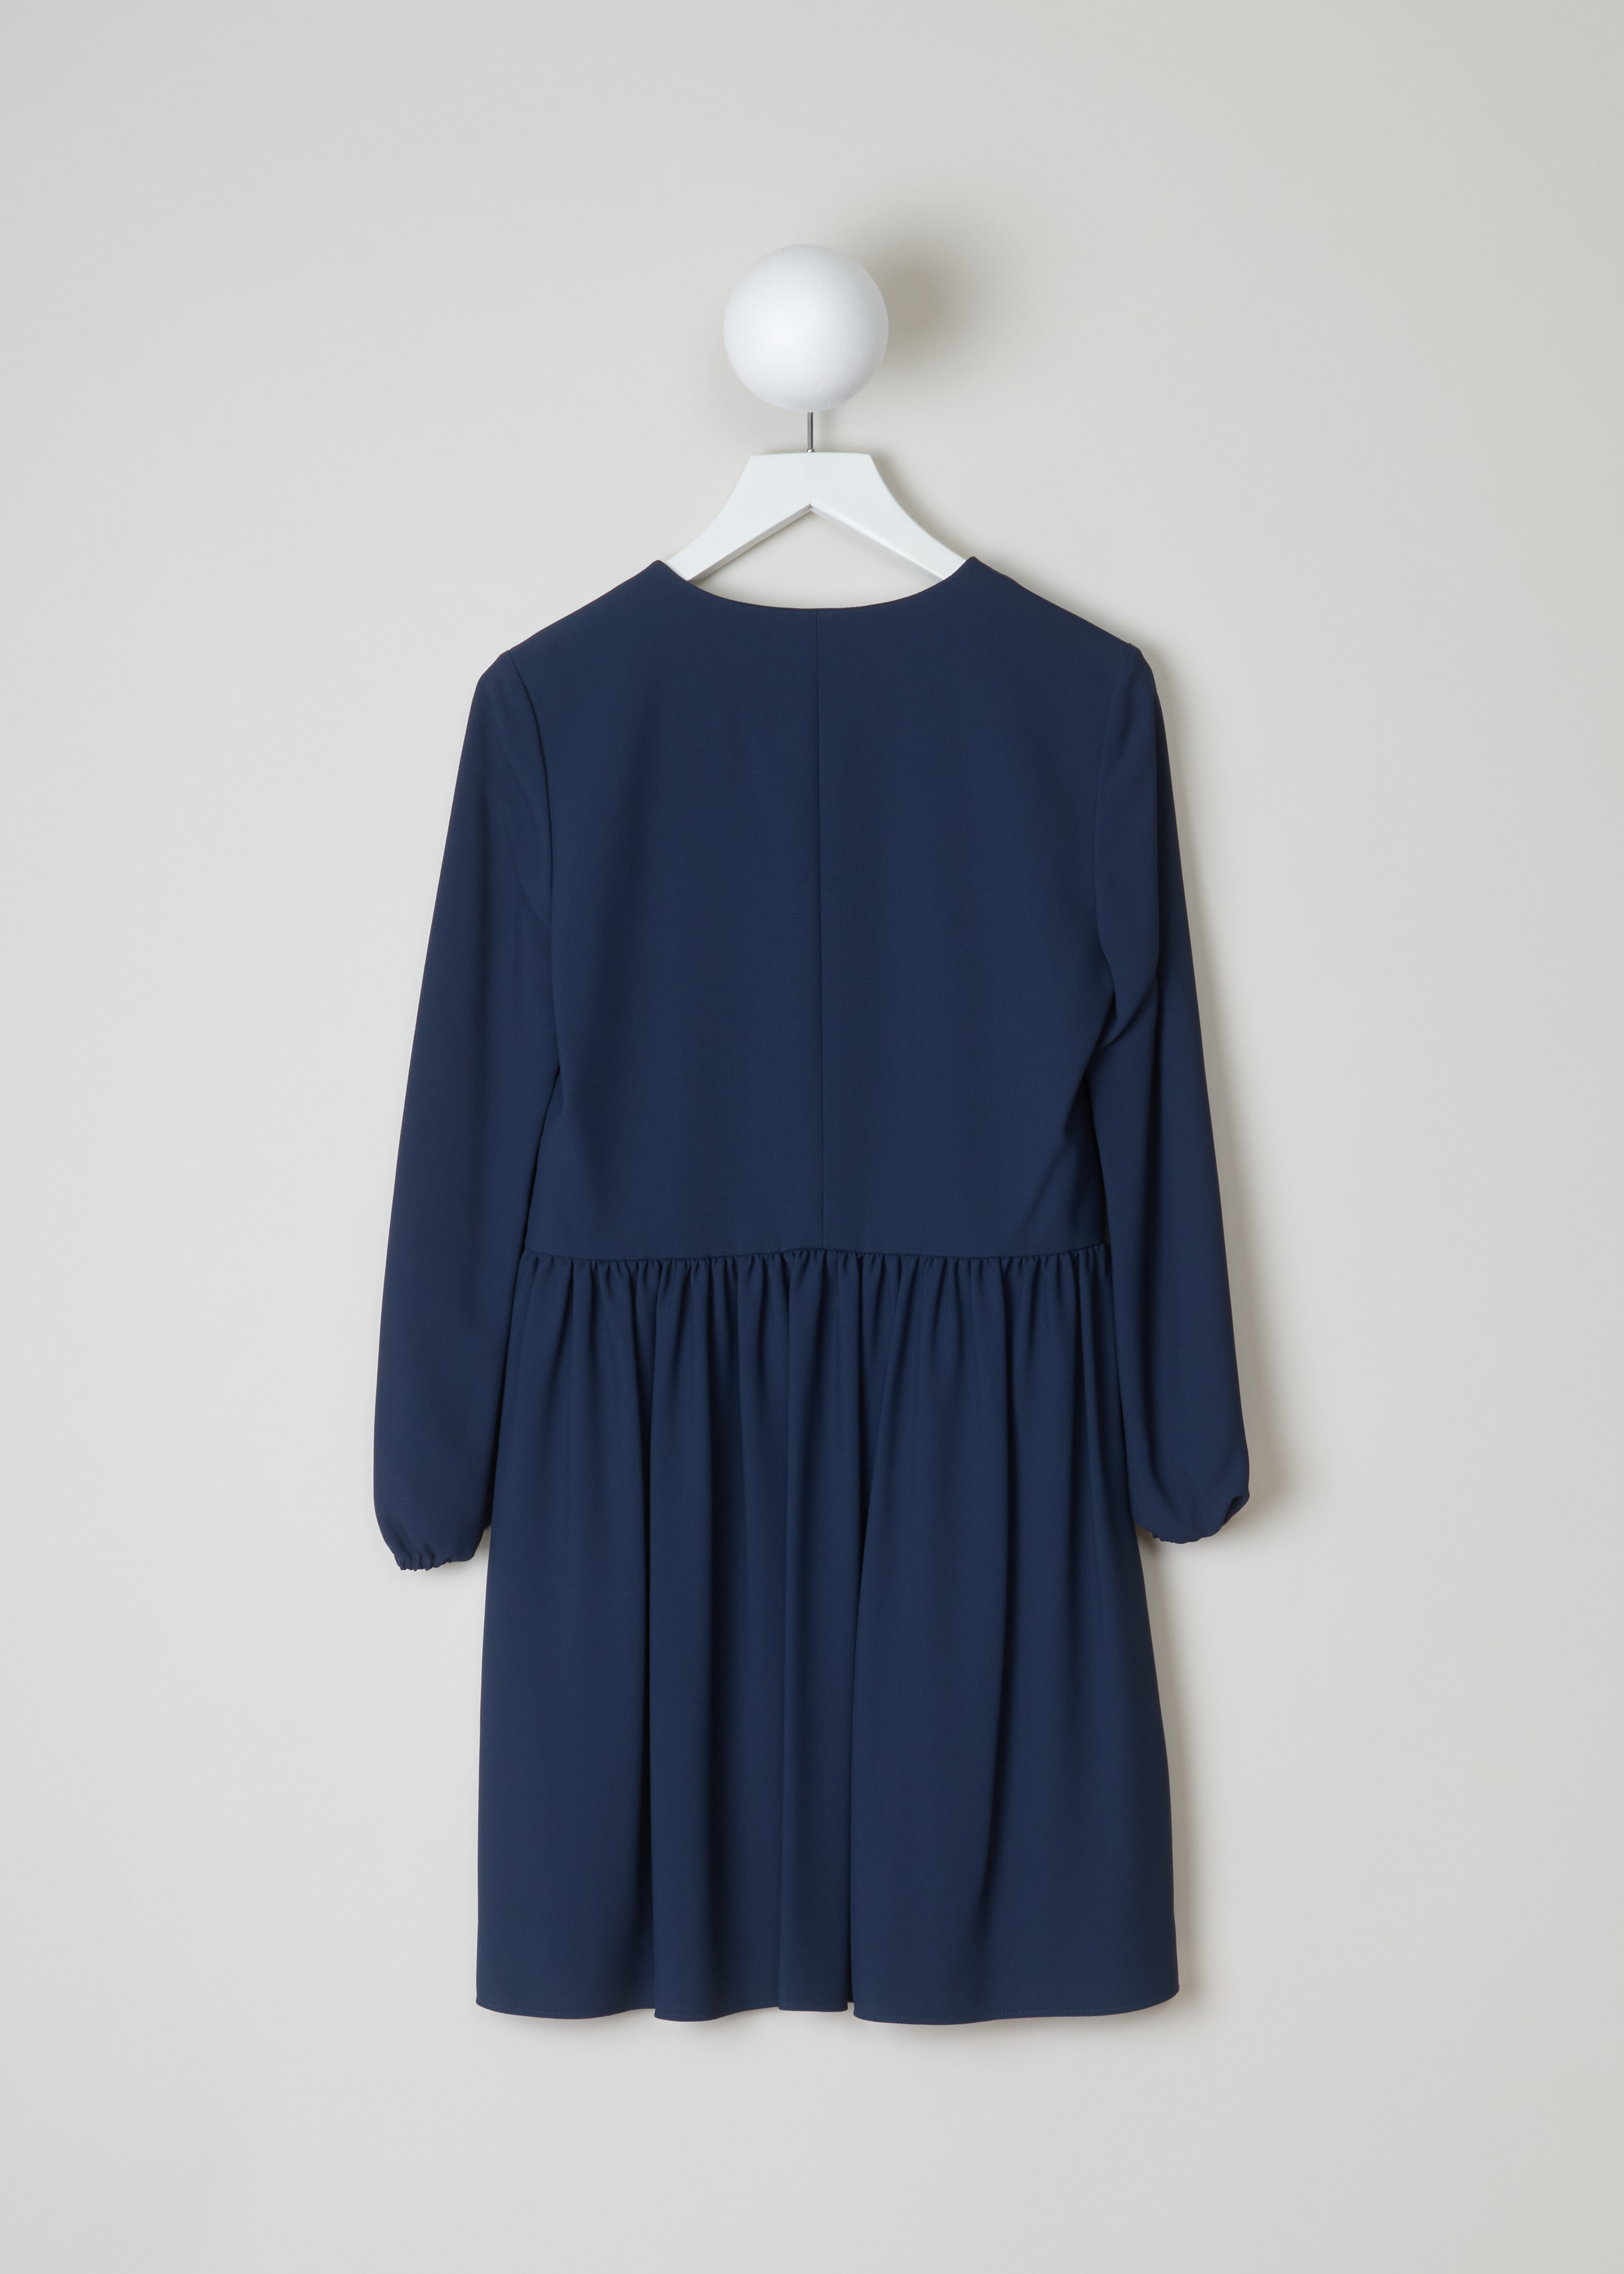 ChloÃ© Gathered deep blue dress 17SRO65_17S37_7B5 deep blue back. Deep blue dress with a V-neck. This model has loose sleeves and gathered cuffs. The straight cut has small pleats around the waist and a midi length. As closure this dress has an invisible zipper on the side.